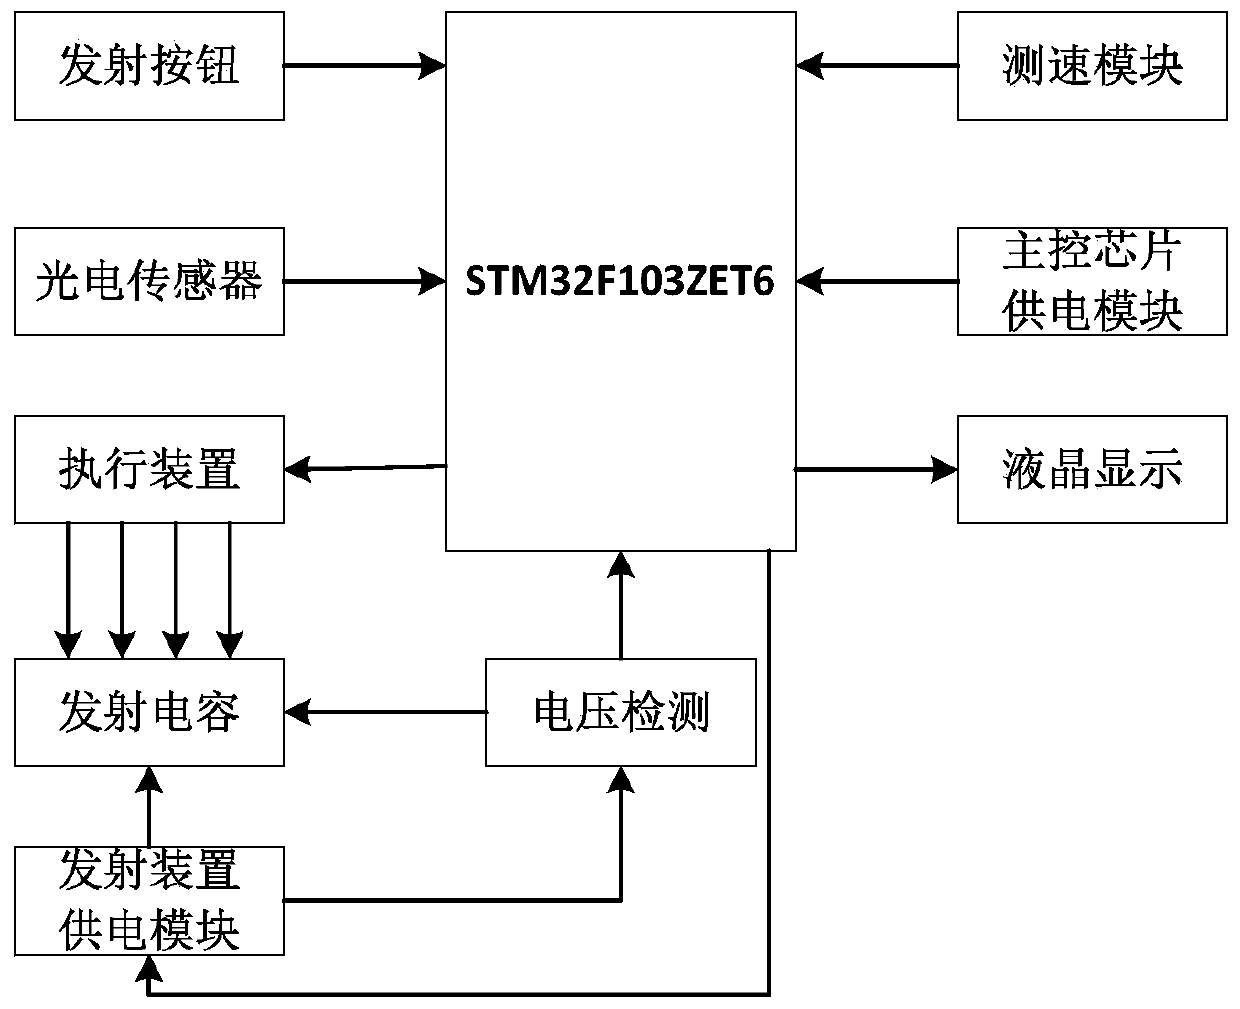 Multi-stage acceleration electromagnetic gun experimental facility based on STM32 control